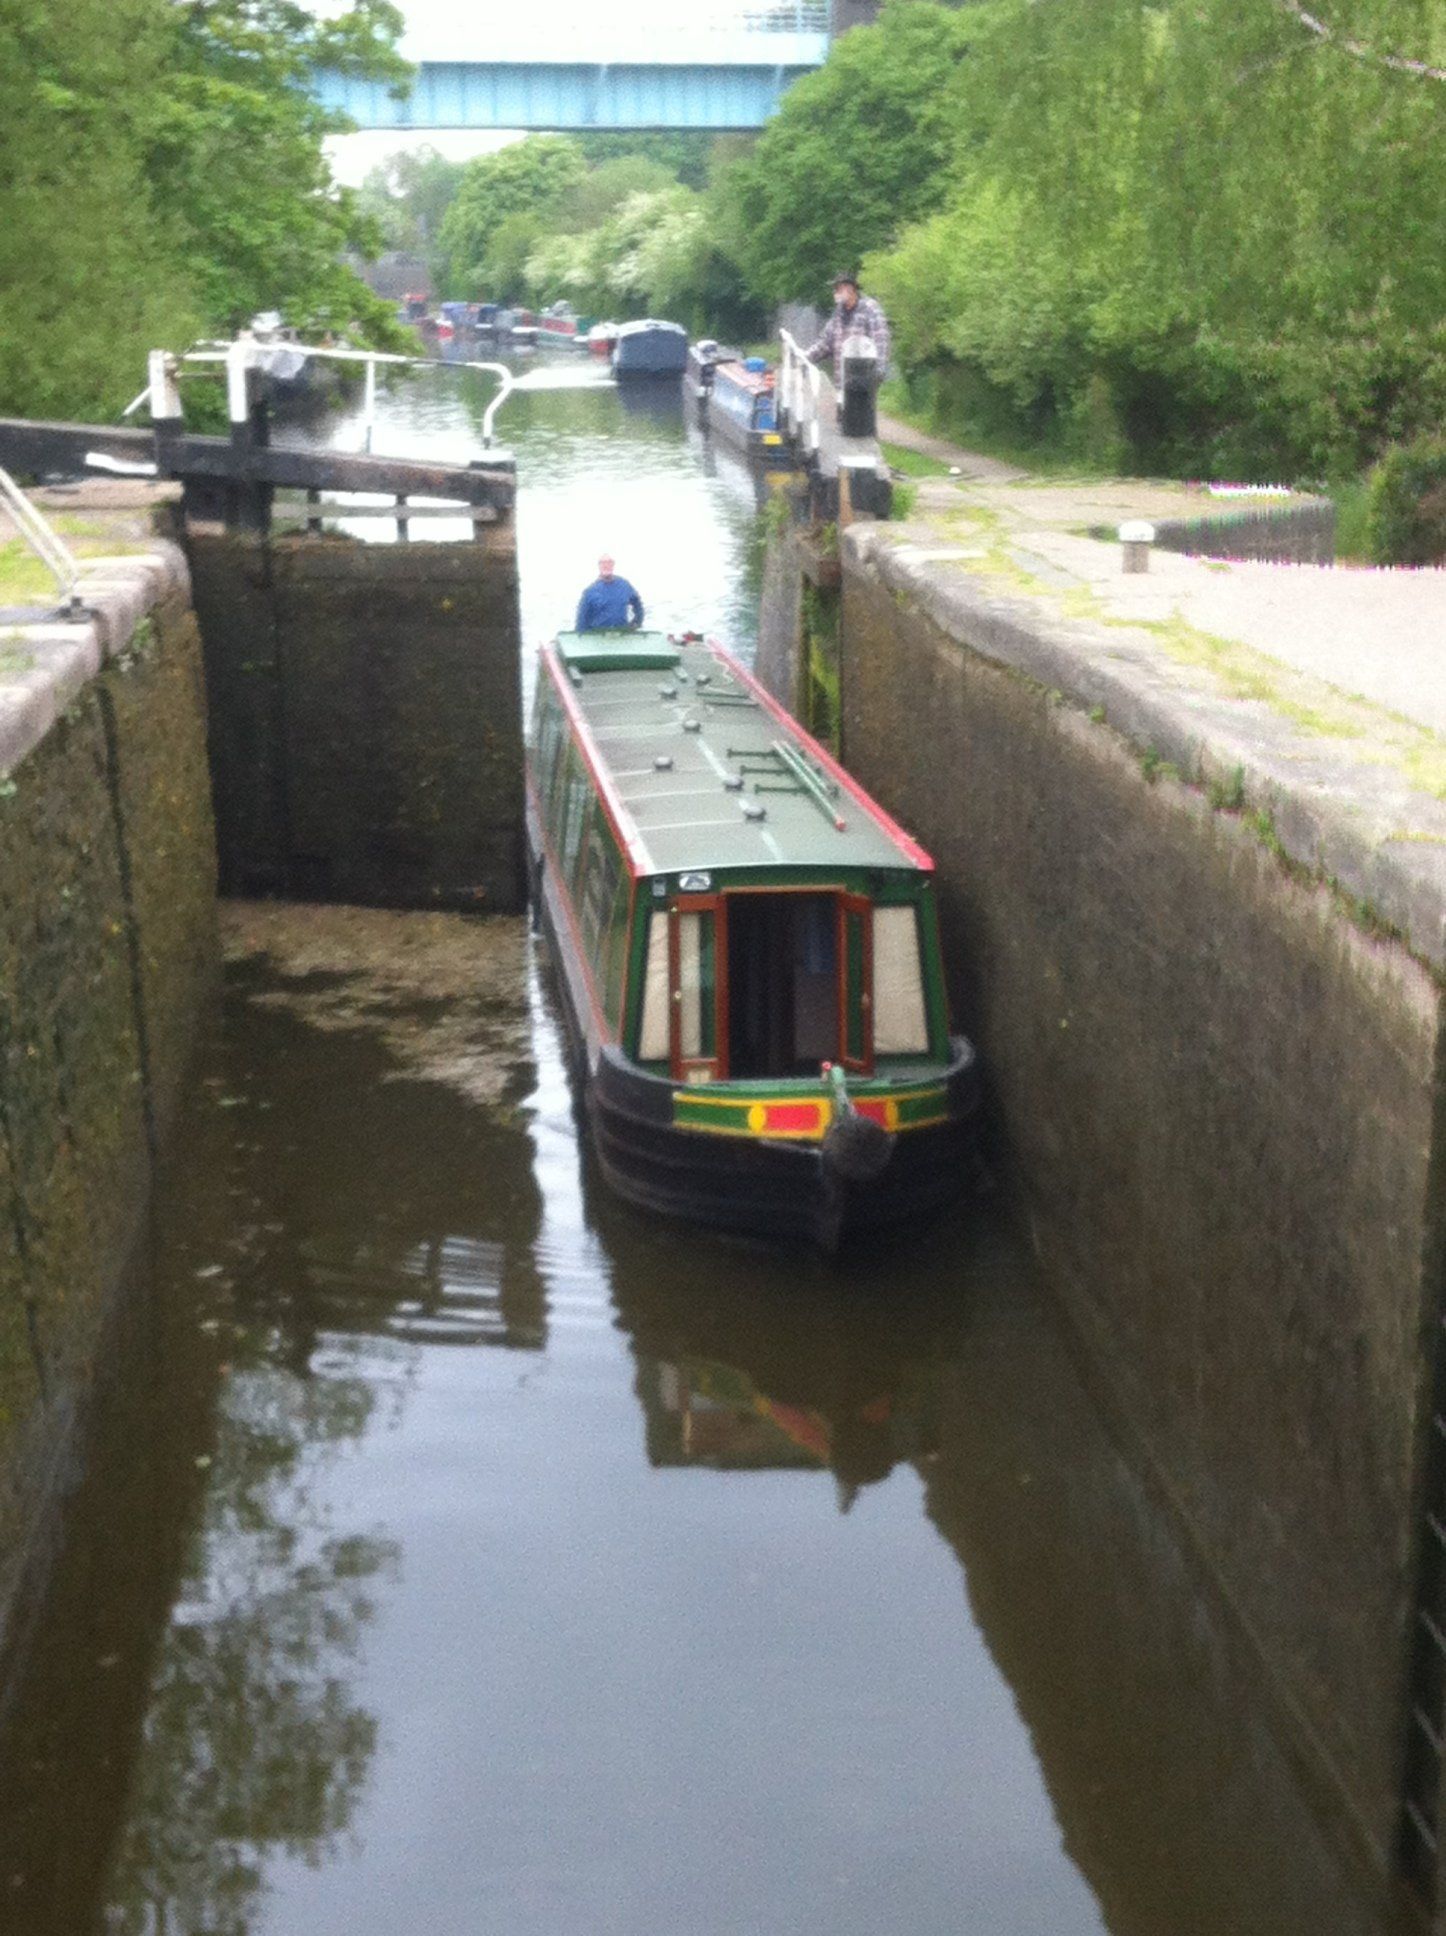 Pickle's Folly entering a lock with a trainee at the helm.